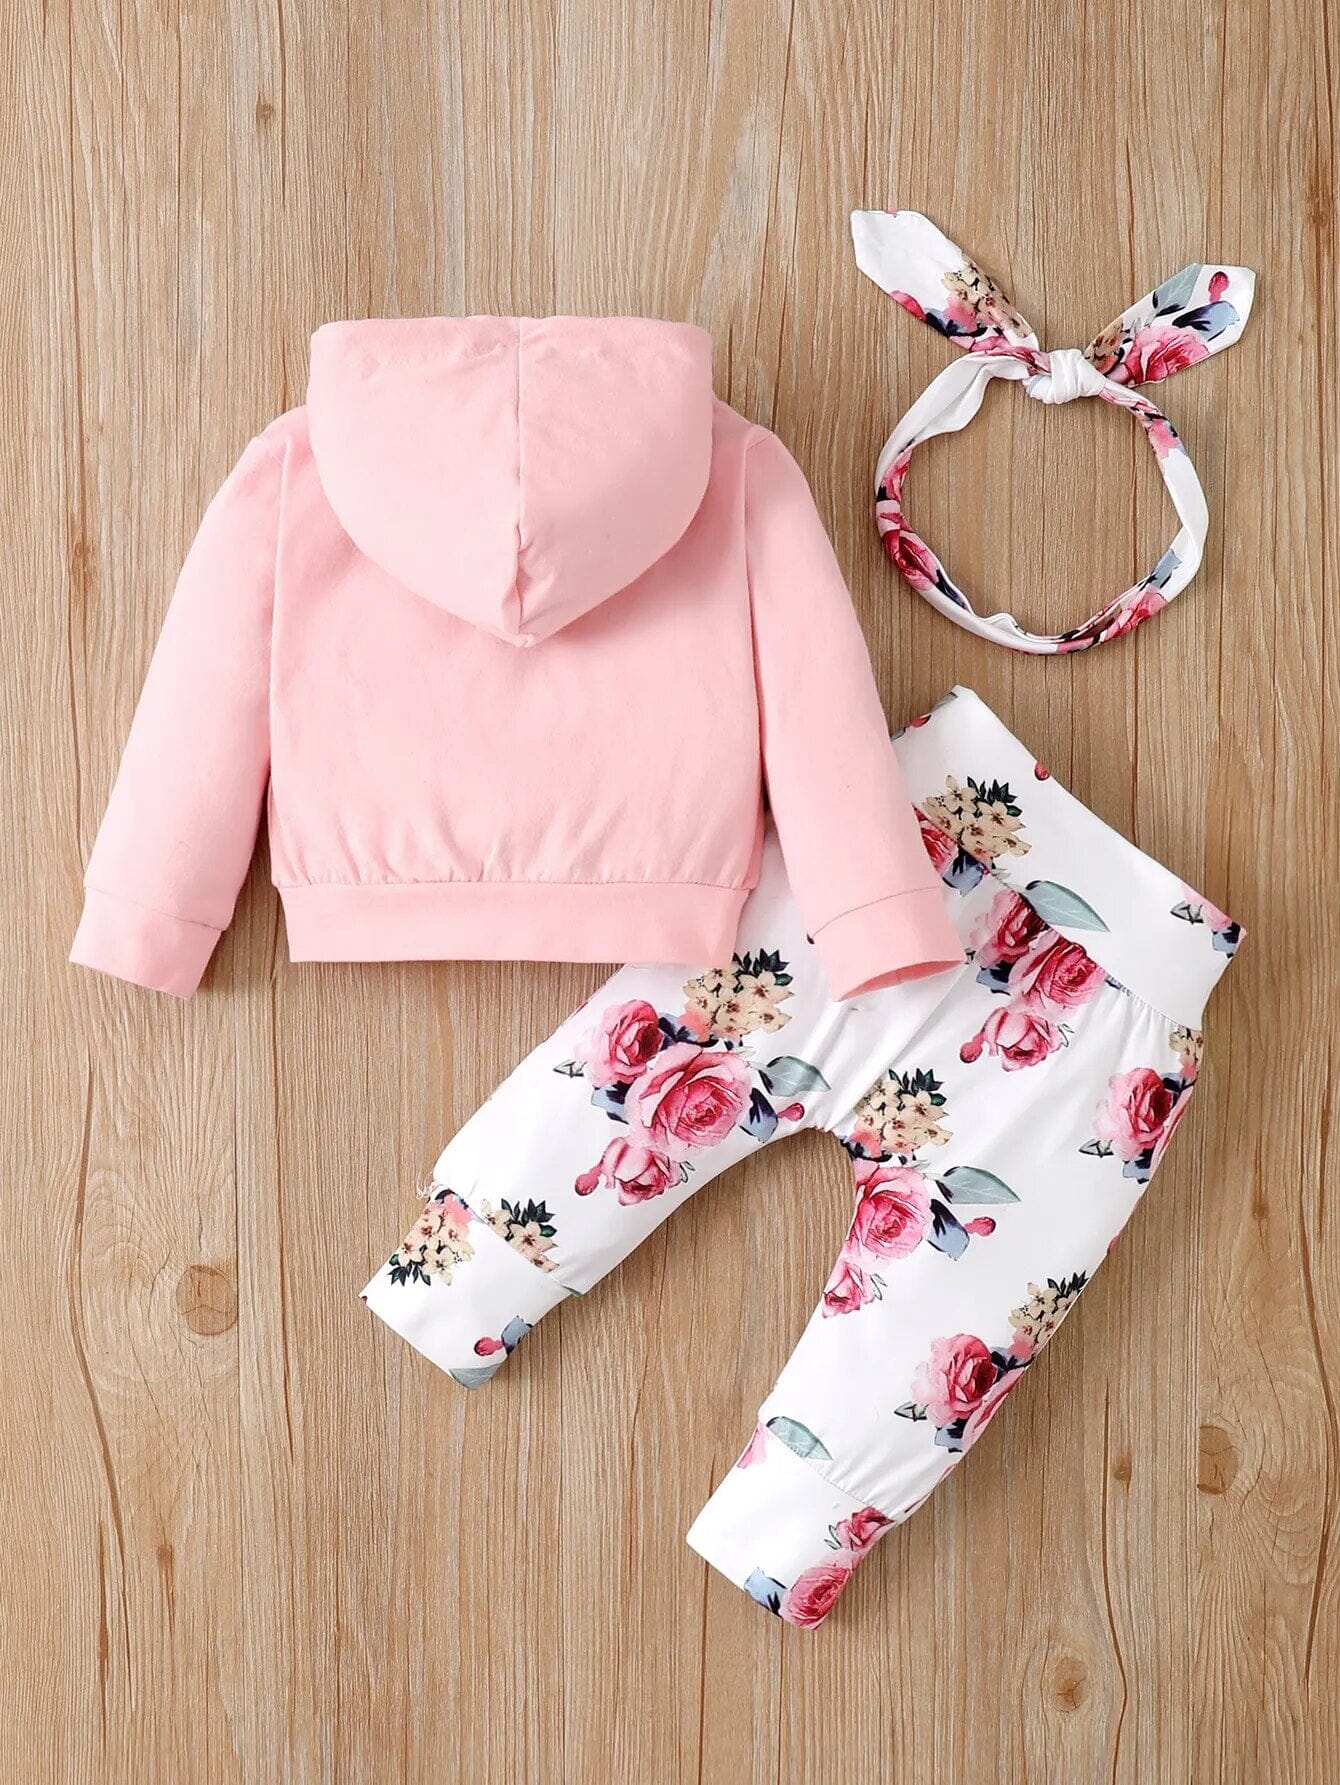 0-24 Months Newborn Baby Girl Clothes Hooded Printed Top + Pant + Headband 3pcs Floral Toddler Girl Clothes Baby Girl Outfit Set Baby Bubble Store 